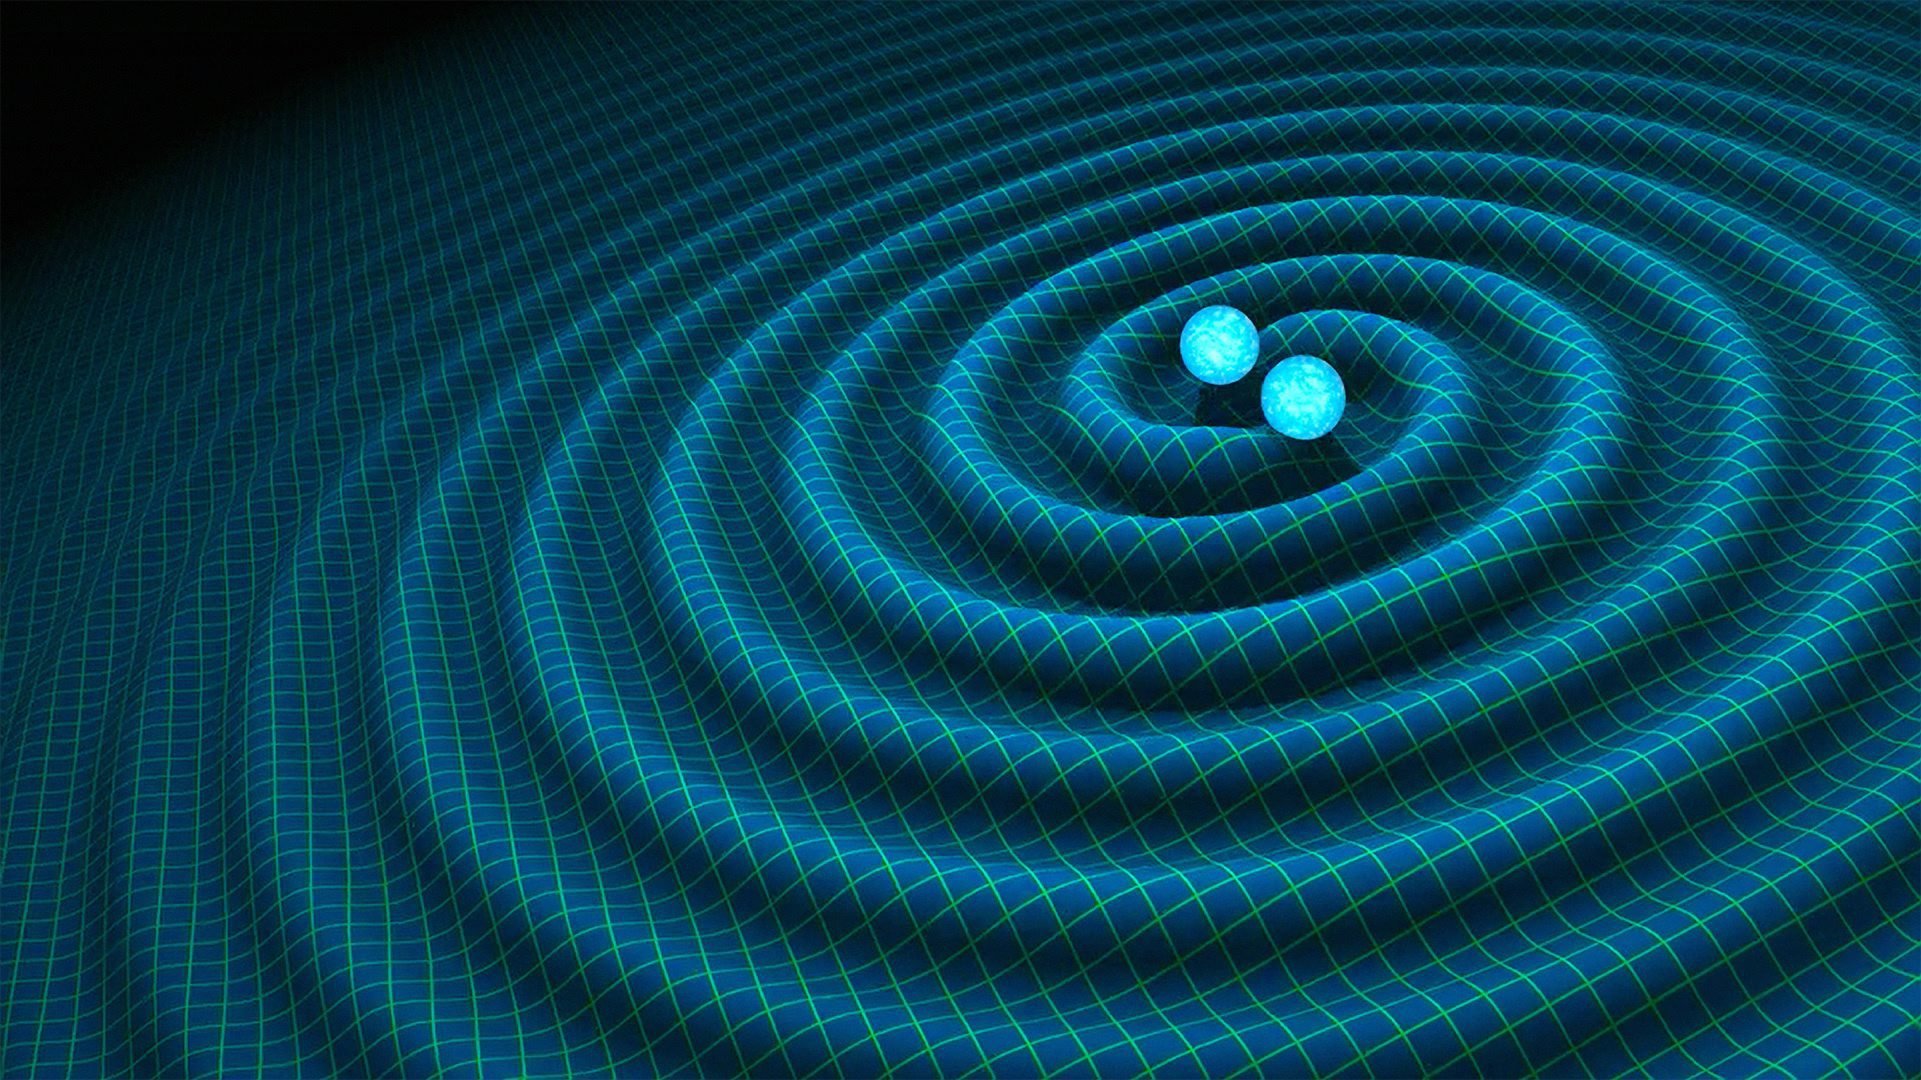 An artist's impression of gravitational waves generated by binary neutron stars. US researchers said on Feb. 11 2016 they have detected gravitational waves, which physicist Albert Einstein first described 100 years ago as 'ripples in the fabric of space-time.' (R. Hurt/Caltech-JPL/EPA)